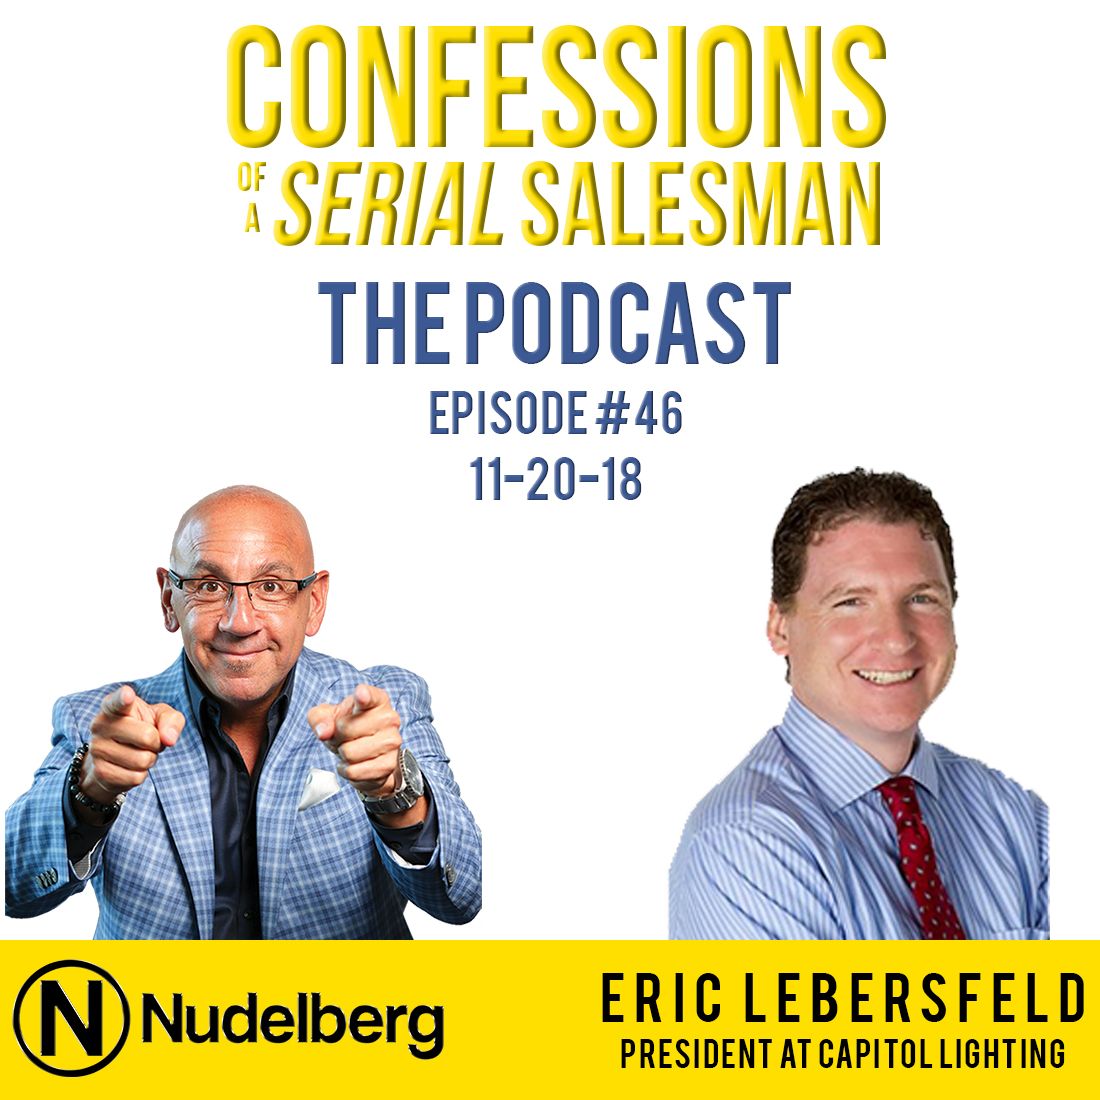 Confessions of a Serial Salesman The Podcast with Eric Lebersfeld, President at Capitol Lighting